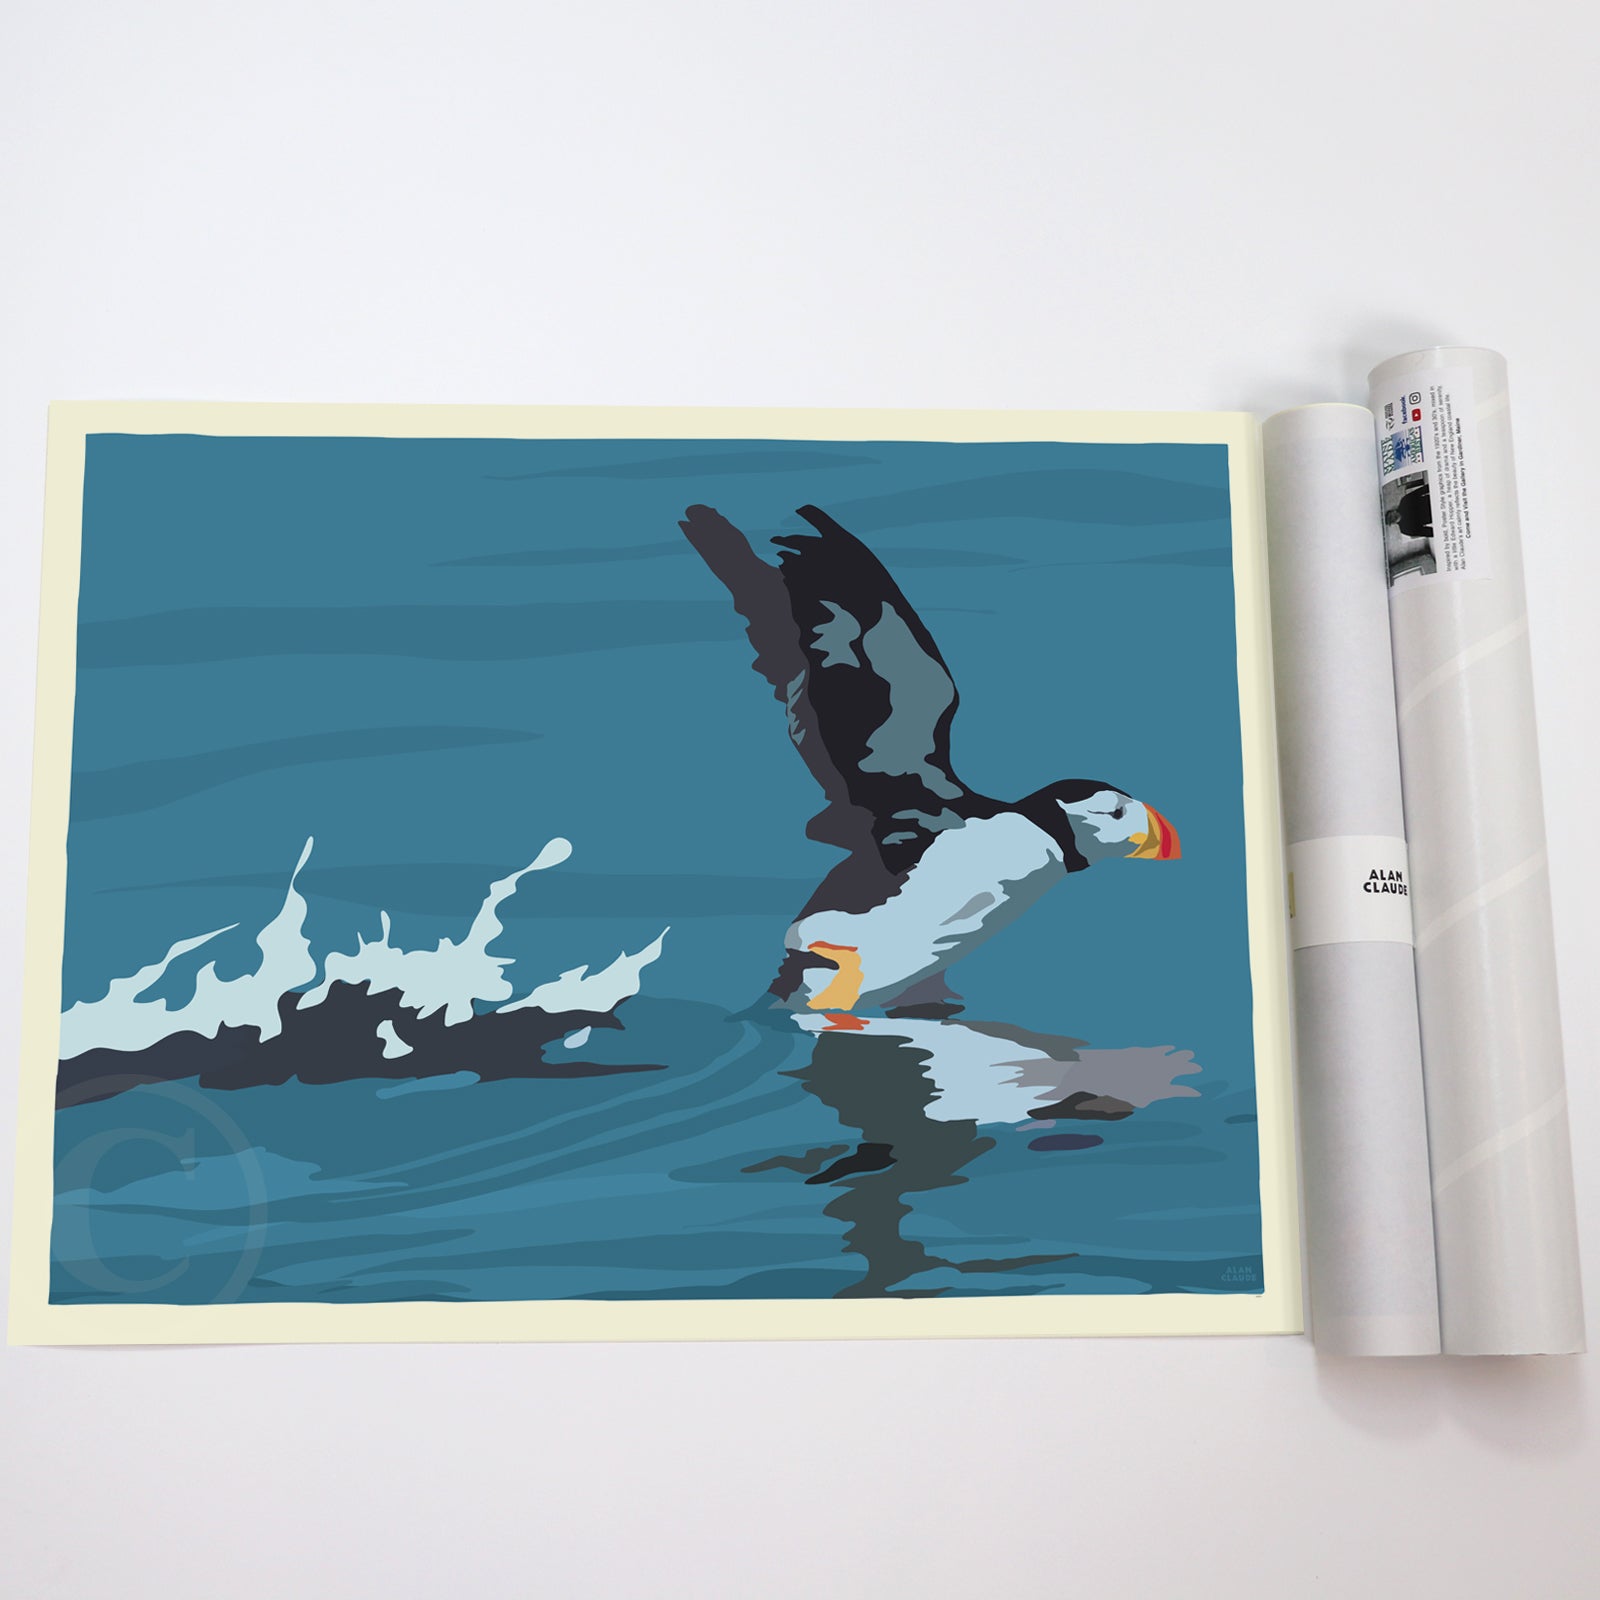 Puffin Takes Flight Art Print 18" x 24" Wall Poster By Alan Claude - Maine